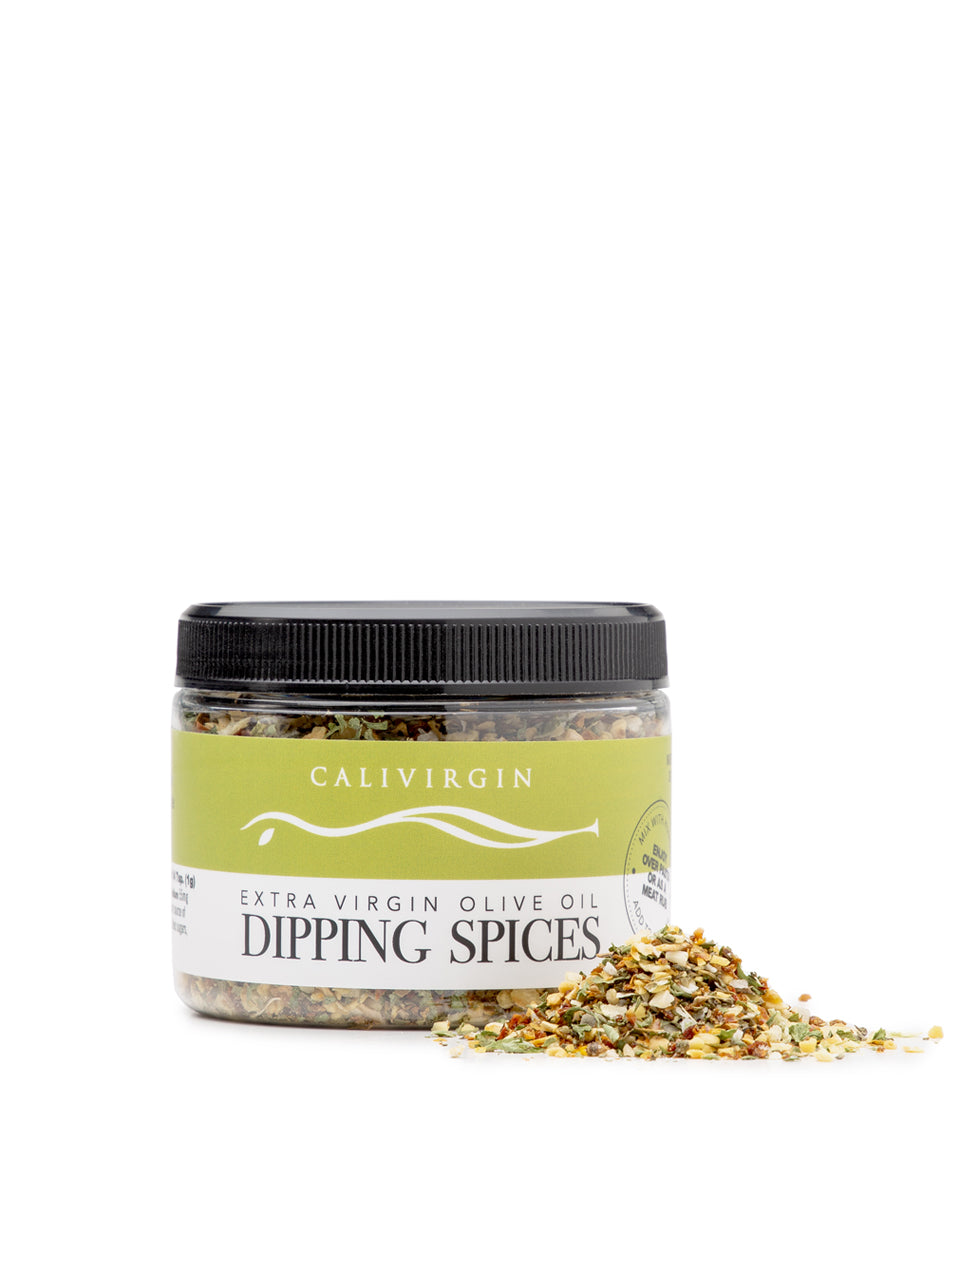 Calivirgin Dipping Spices